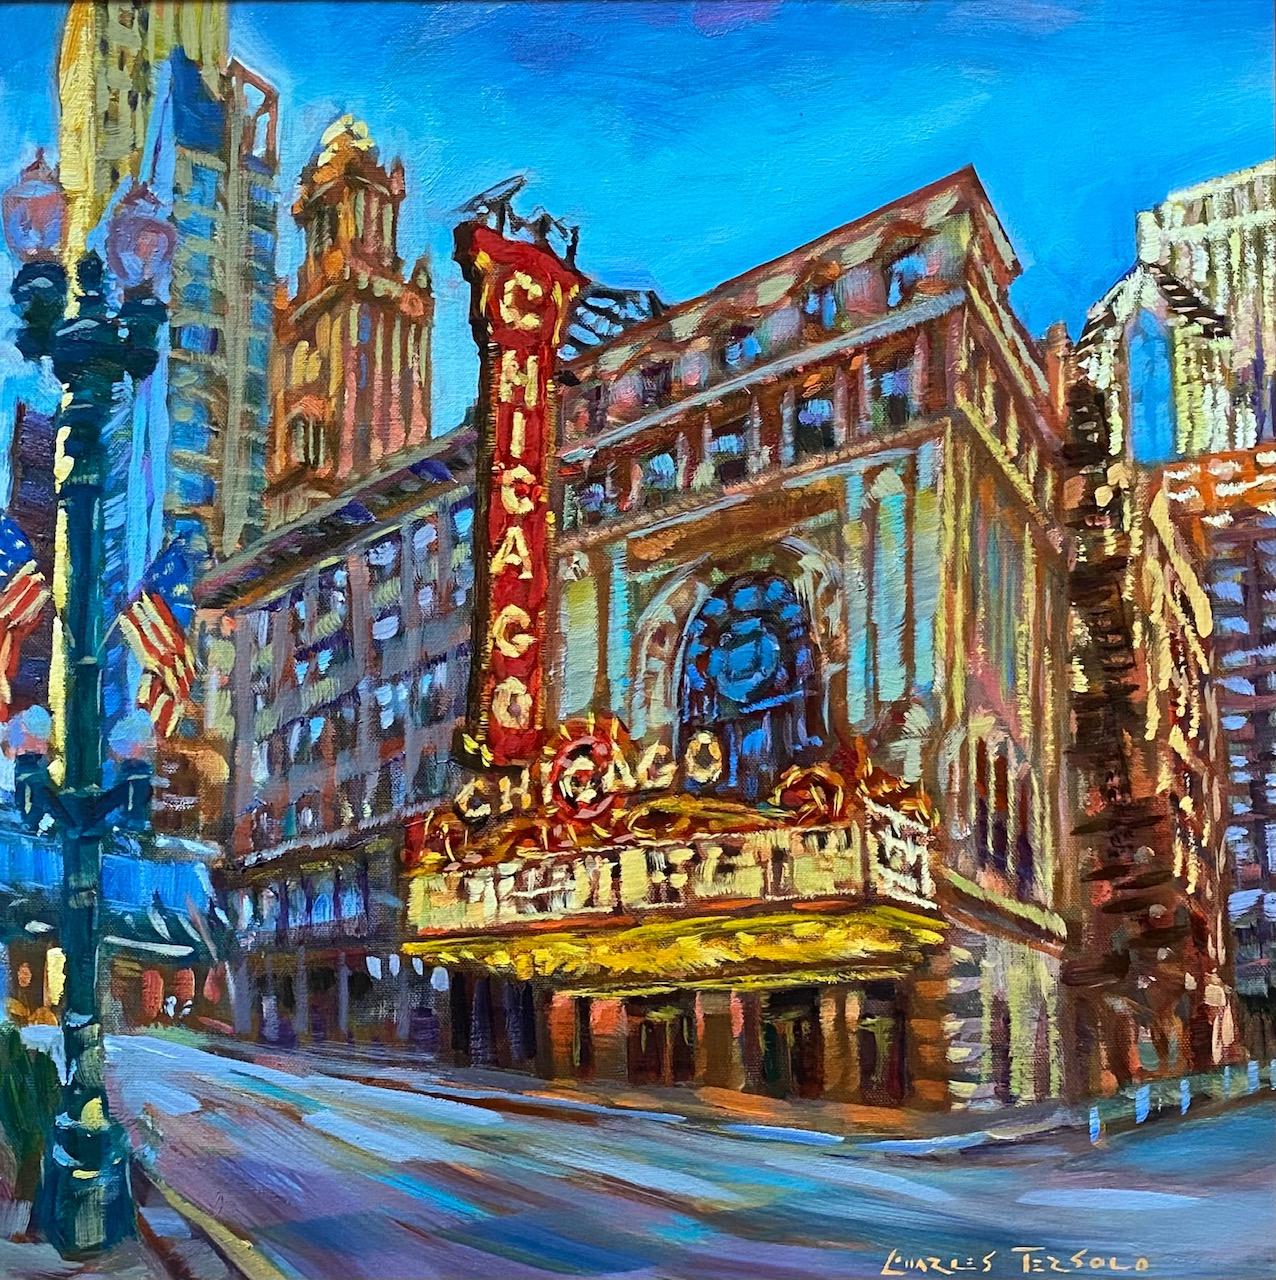 Chicago, original expressionist American urban landscape - Painting by Charles Tersolo